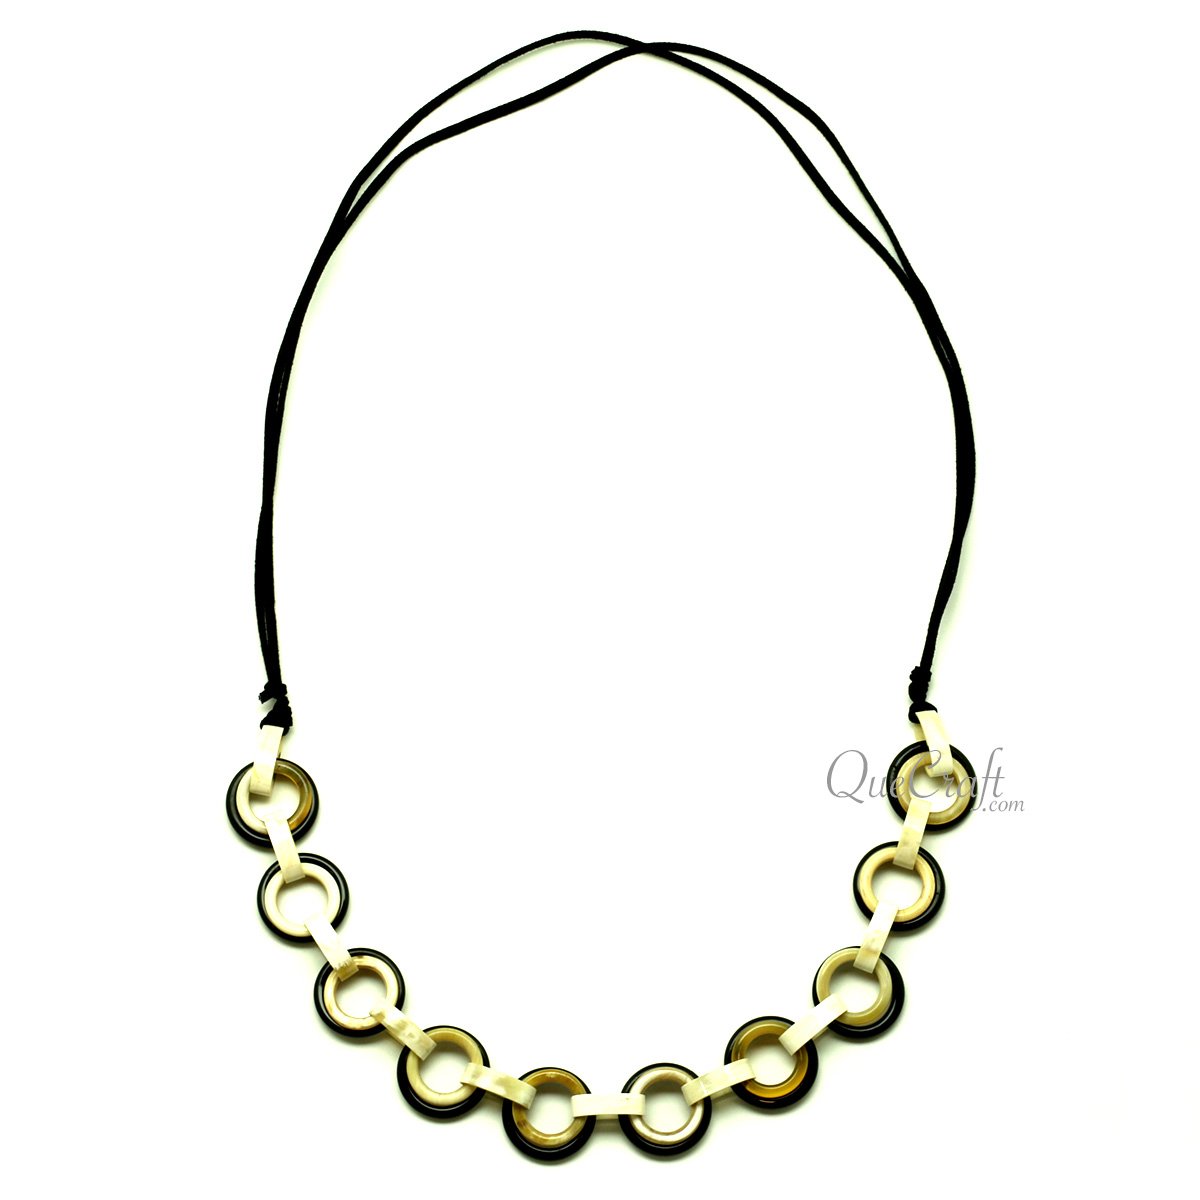 Horn String Necklace #13387 - HORN JEWELRY